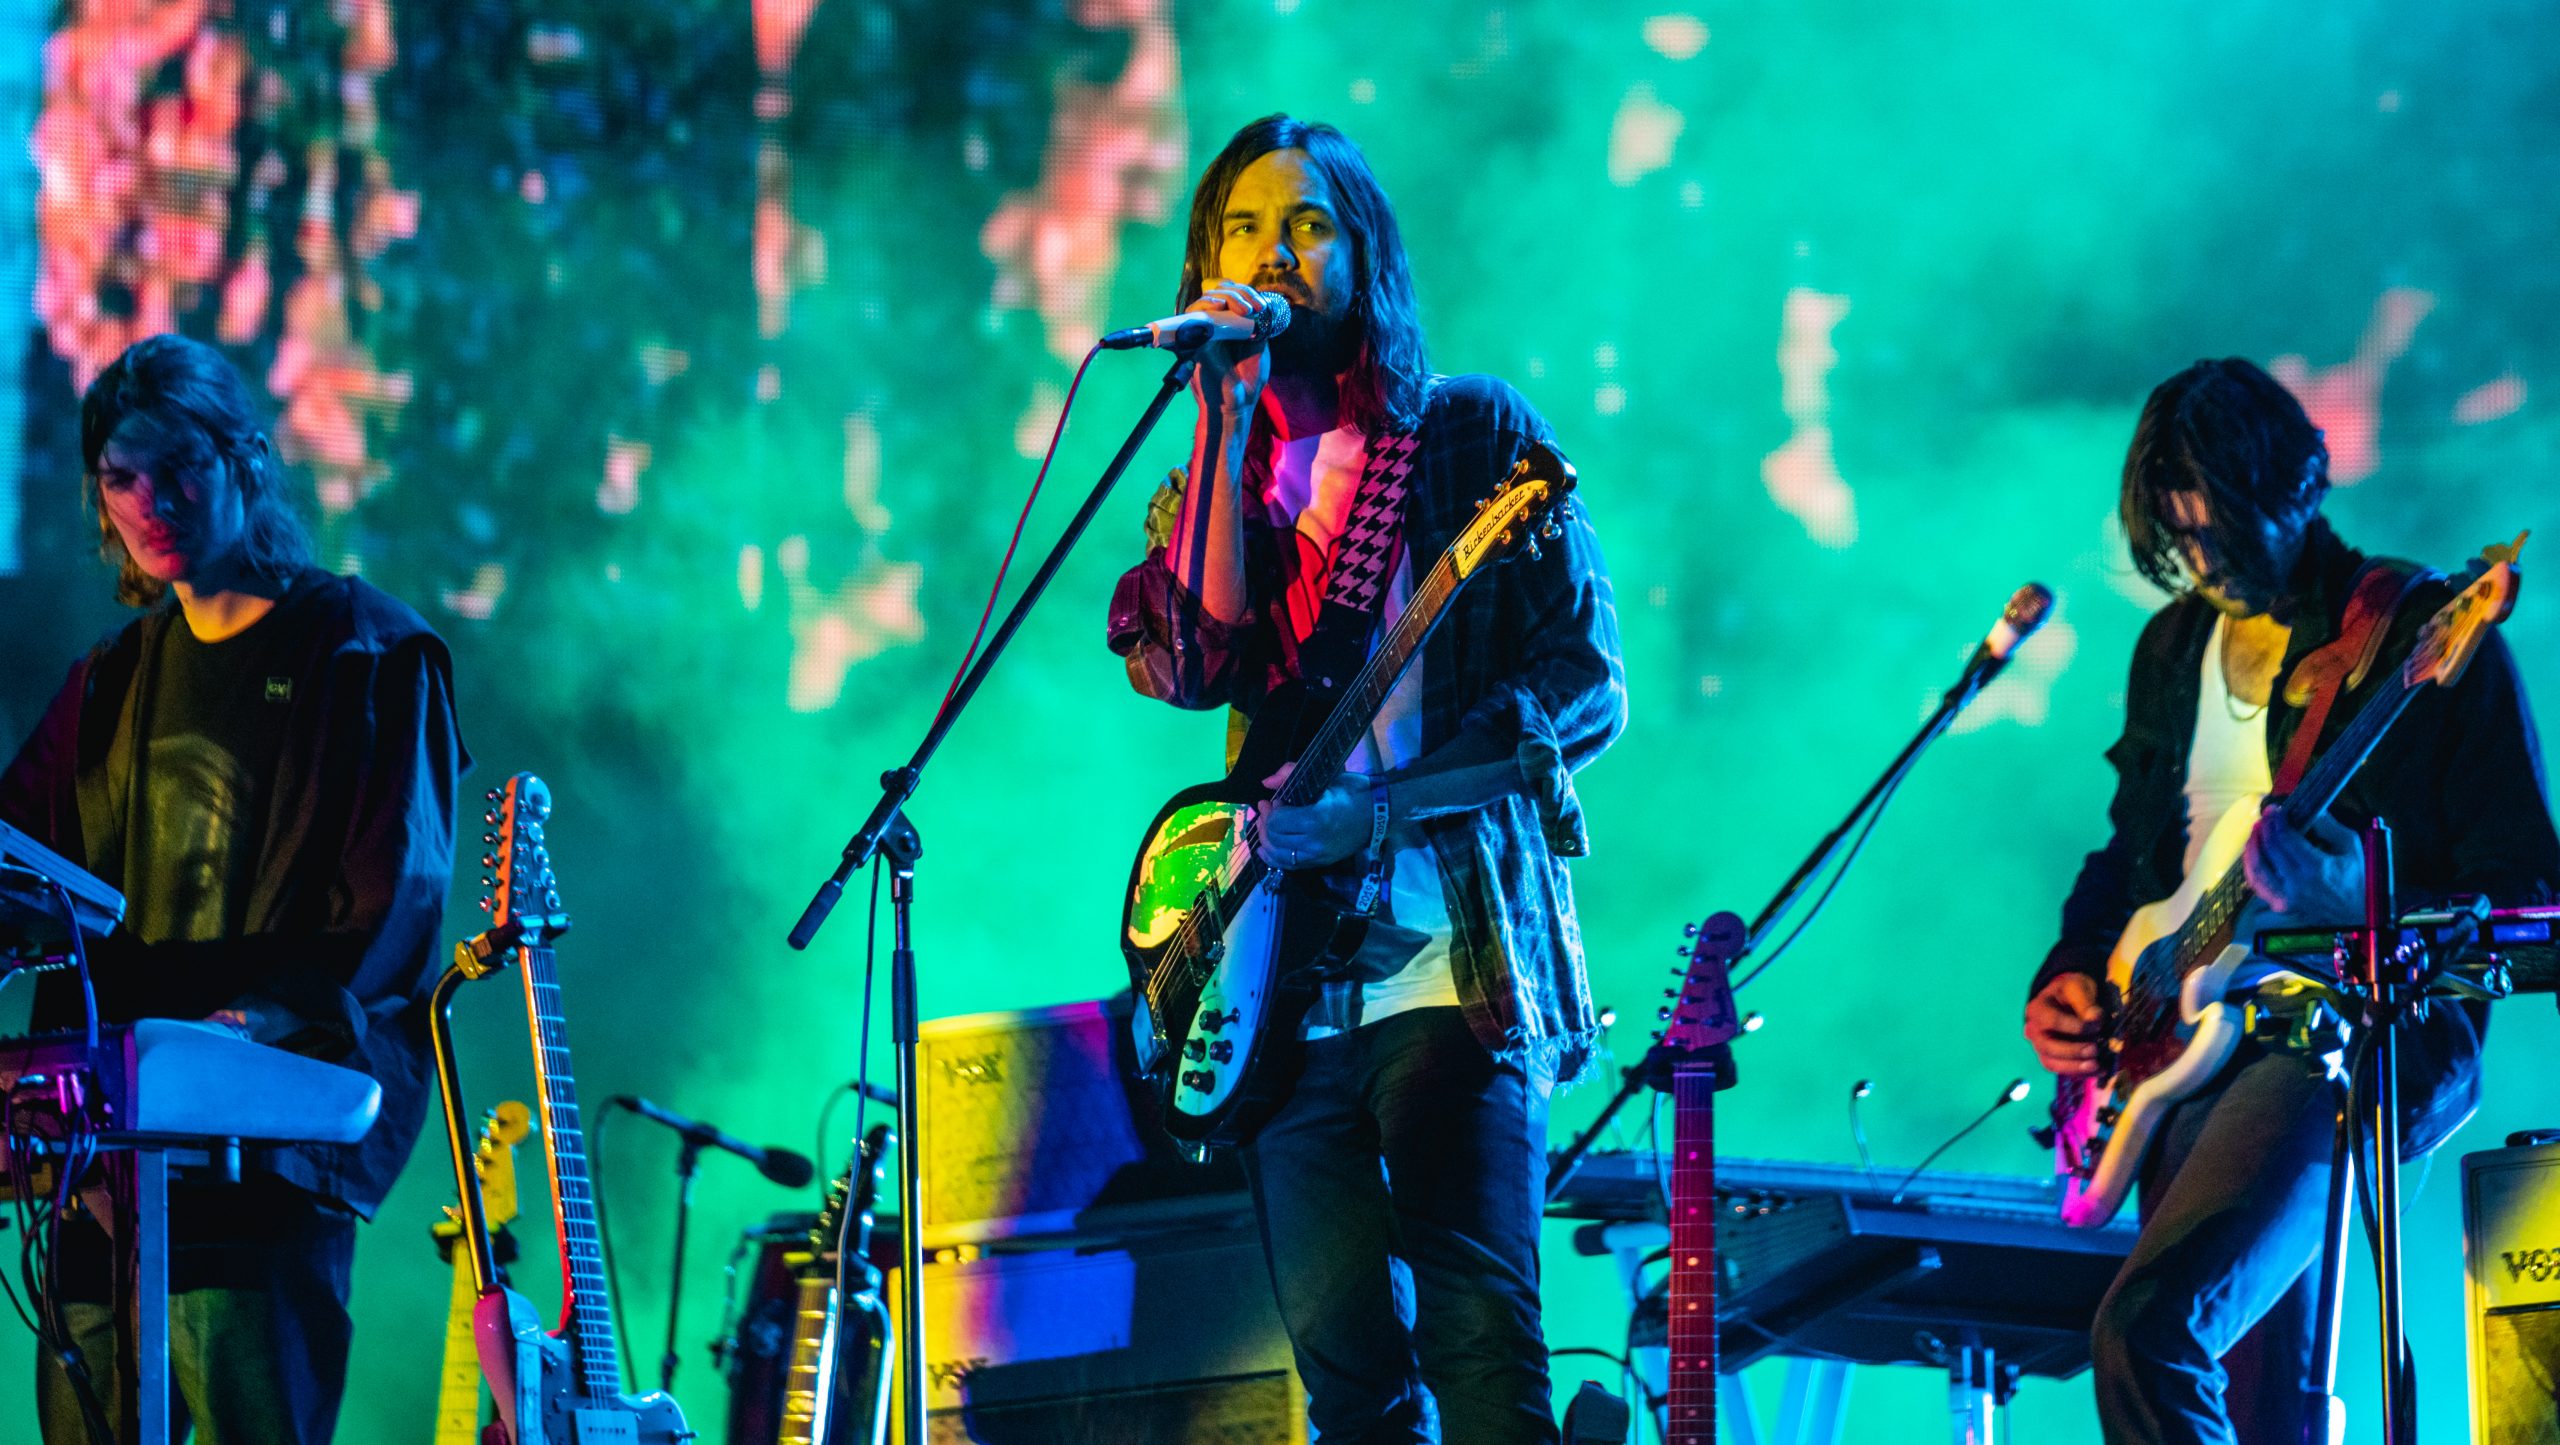 Tame Impala are embarking on their biggest ever Australian tour in October